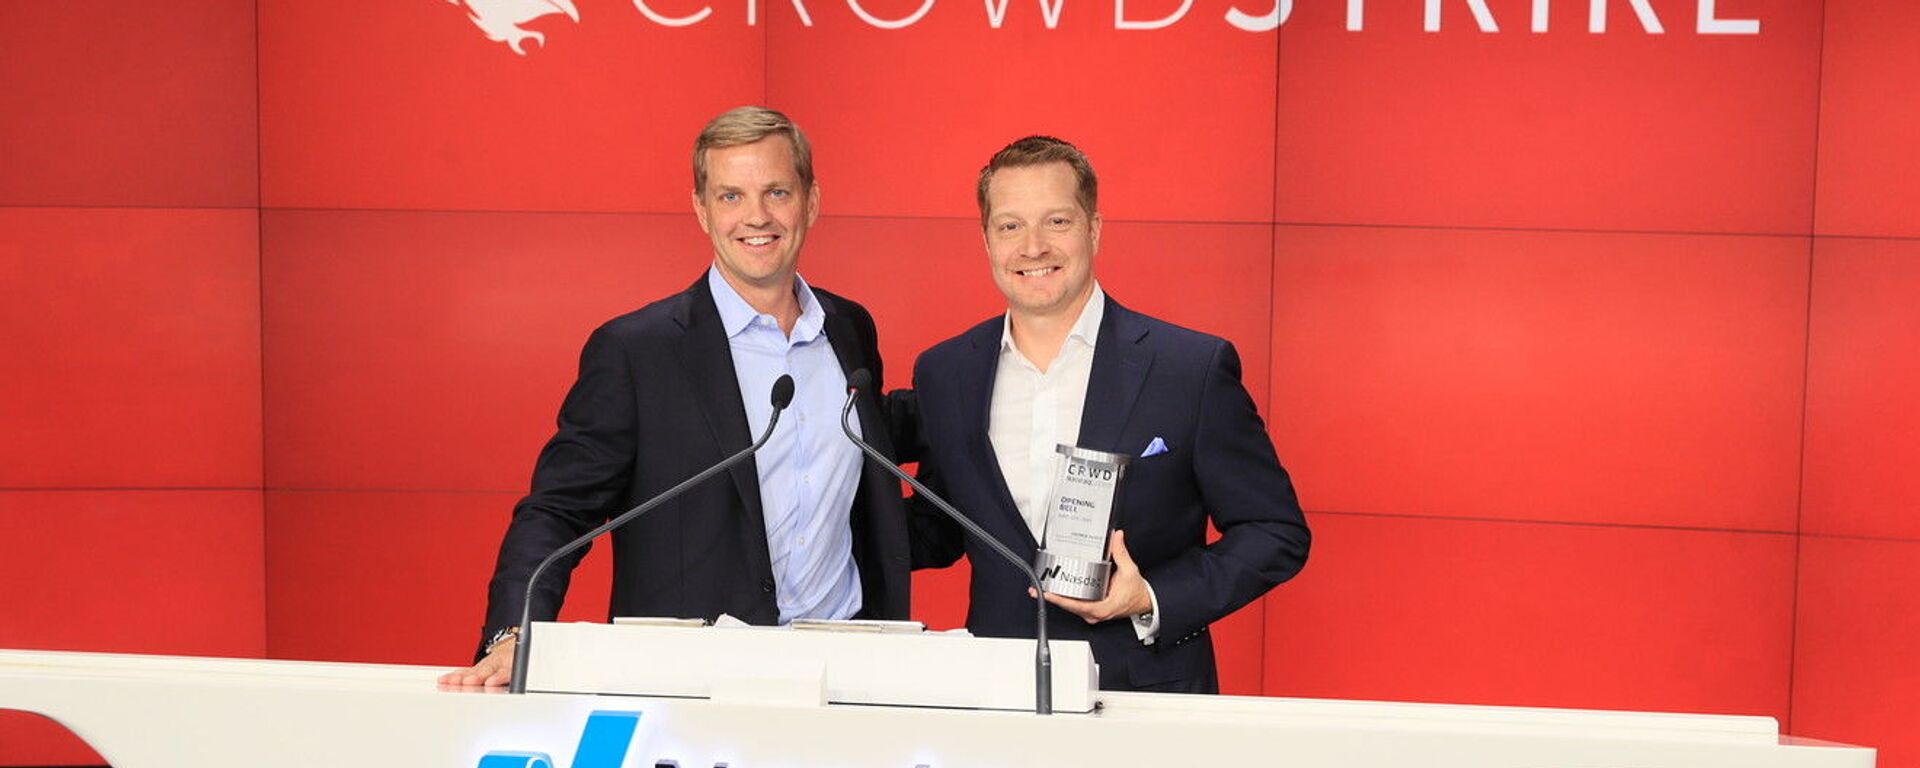 CrowdStrike made its trading debut on the Nasdaq in June after pricing its IPO at $34 a share - Sputnik International, 1920, 24.03.2020